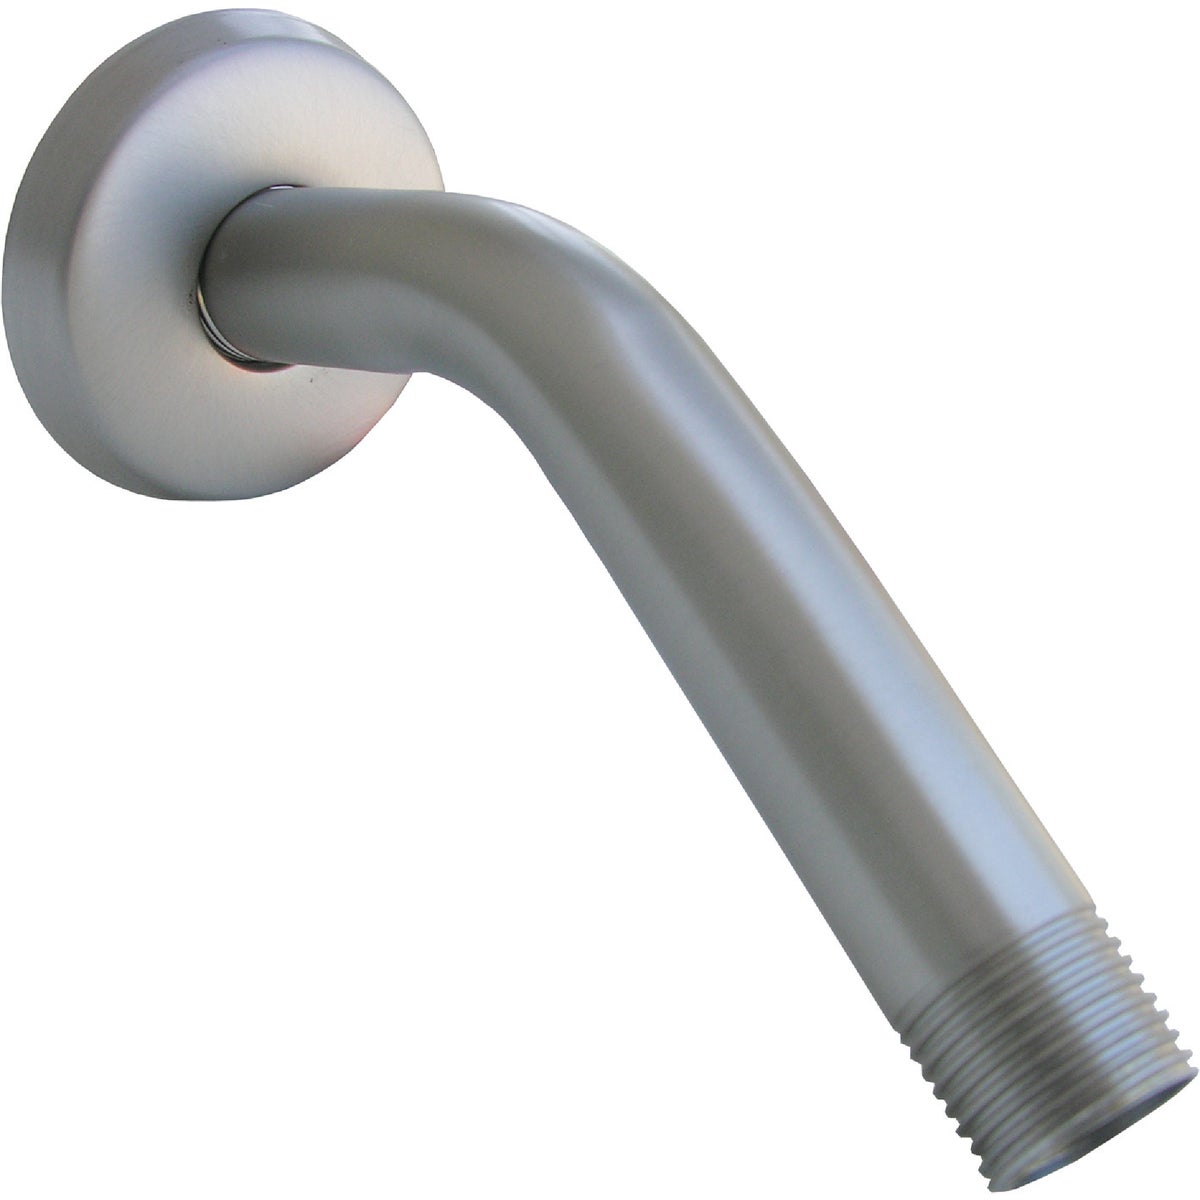 Lasco 6 In. Satin Nickel Shower Arm and Flange